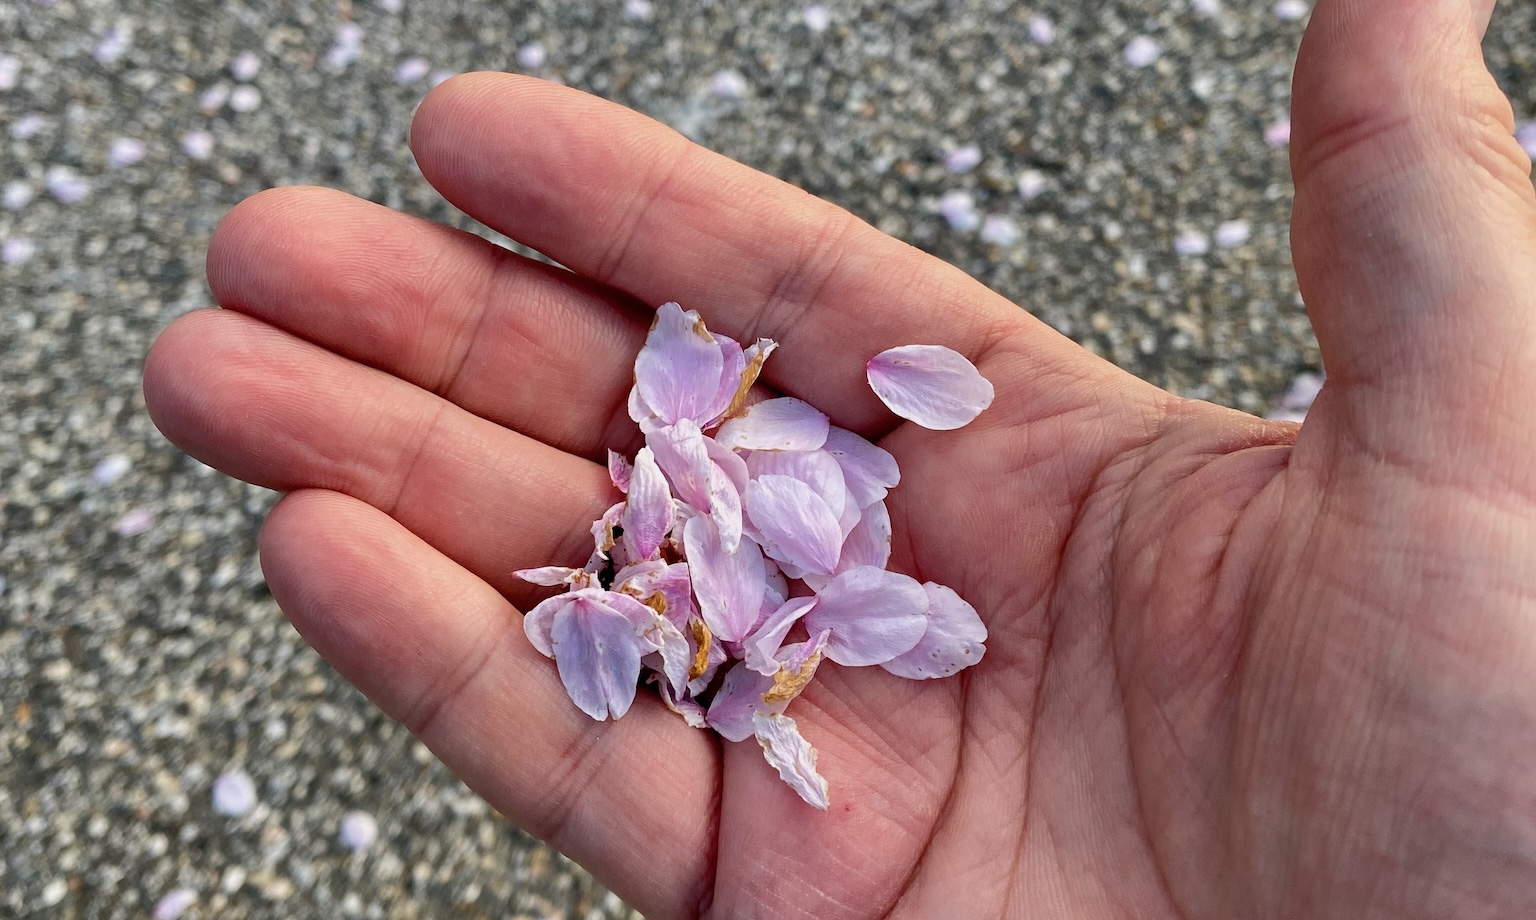 Cherry blossom leaves in the palm of my hand